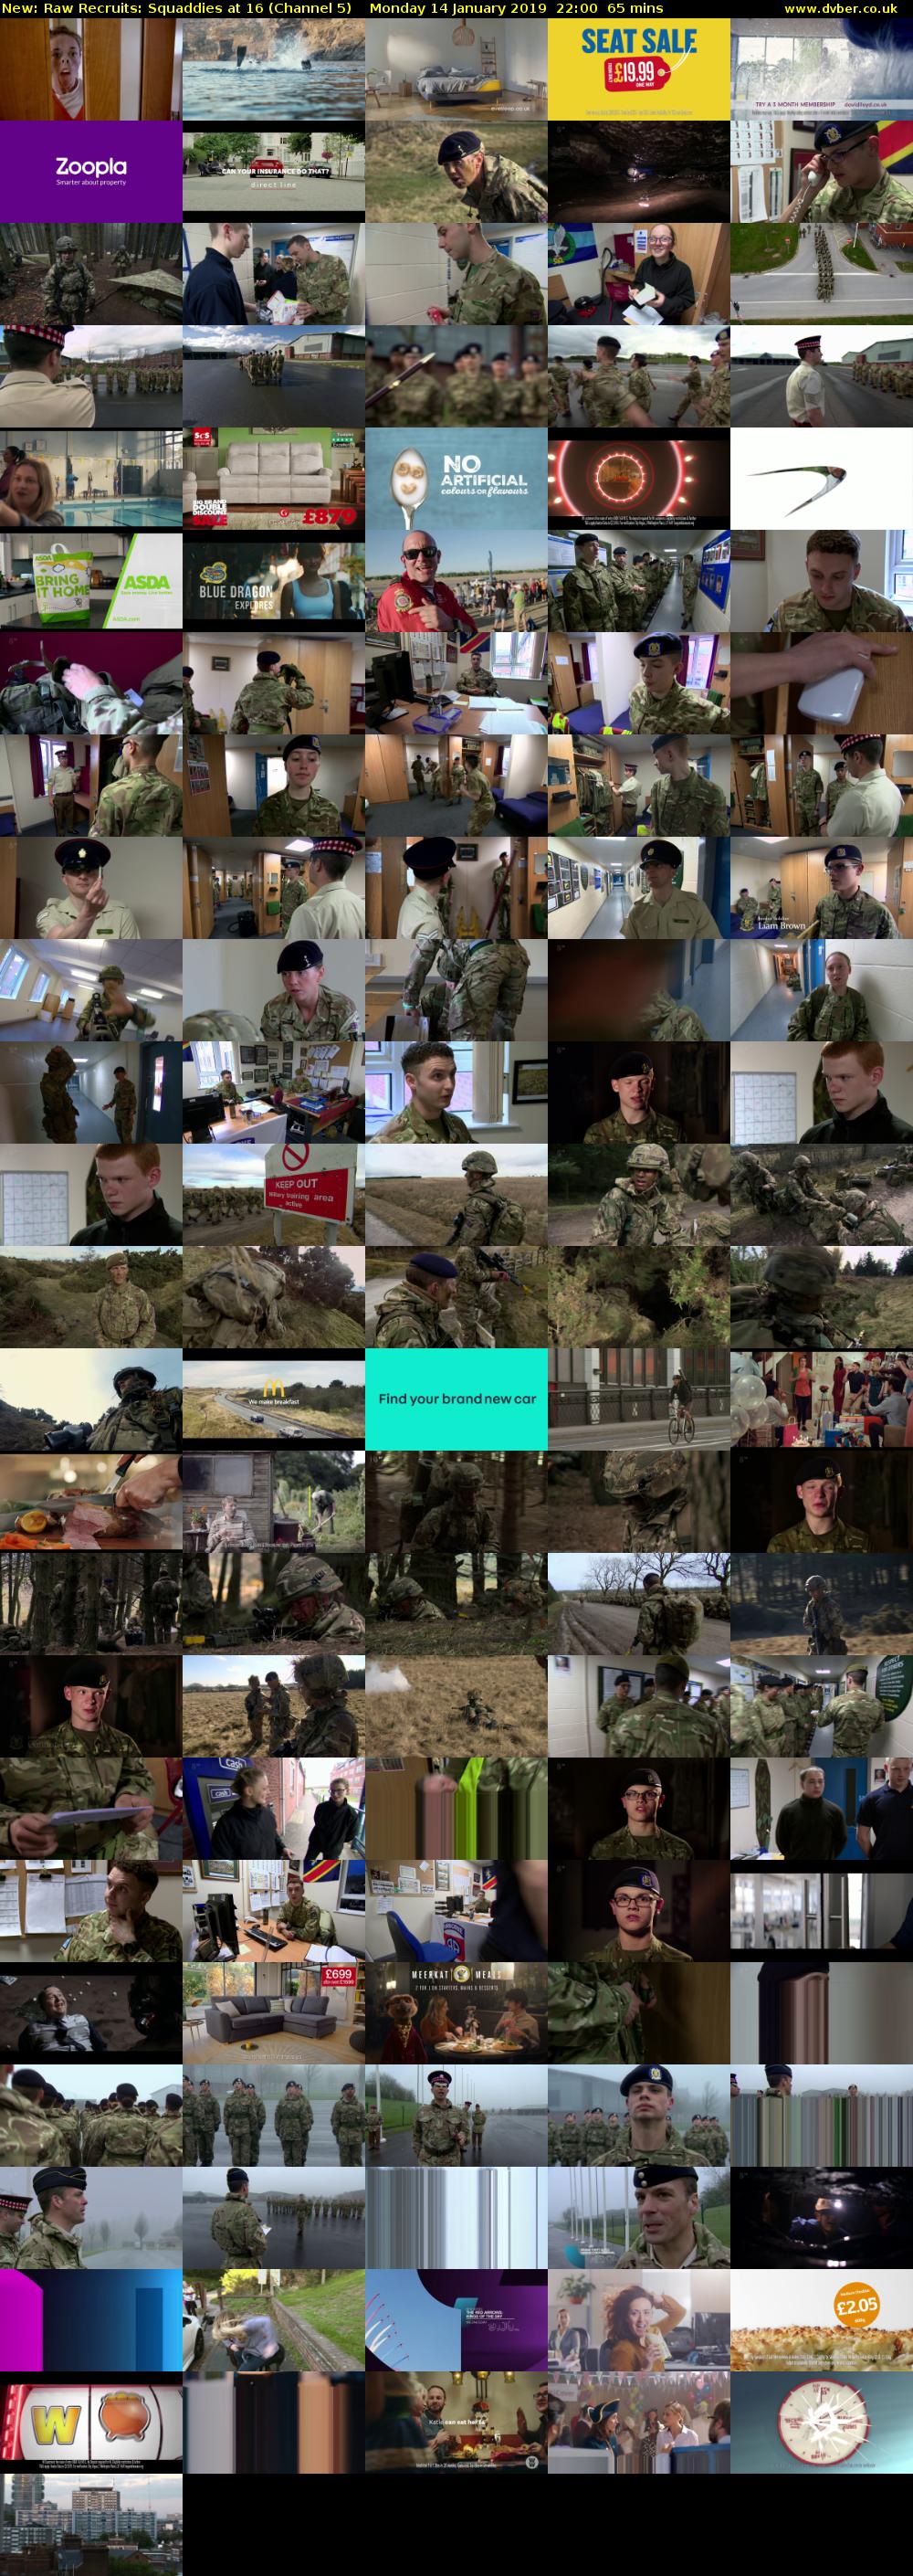 Raw Recruits: Squaddies at 16 (Channel 5) Monday 14 January 2019 22:00 - 23:05